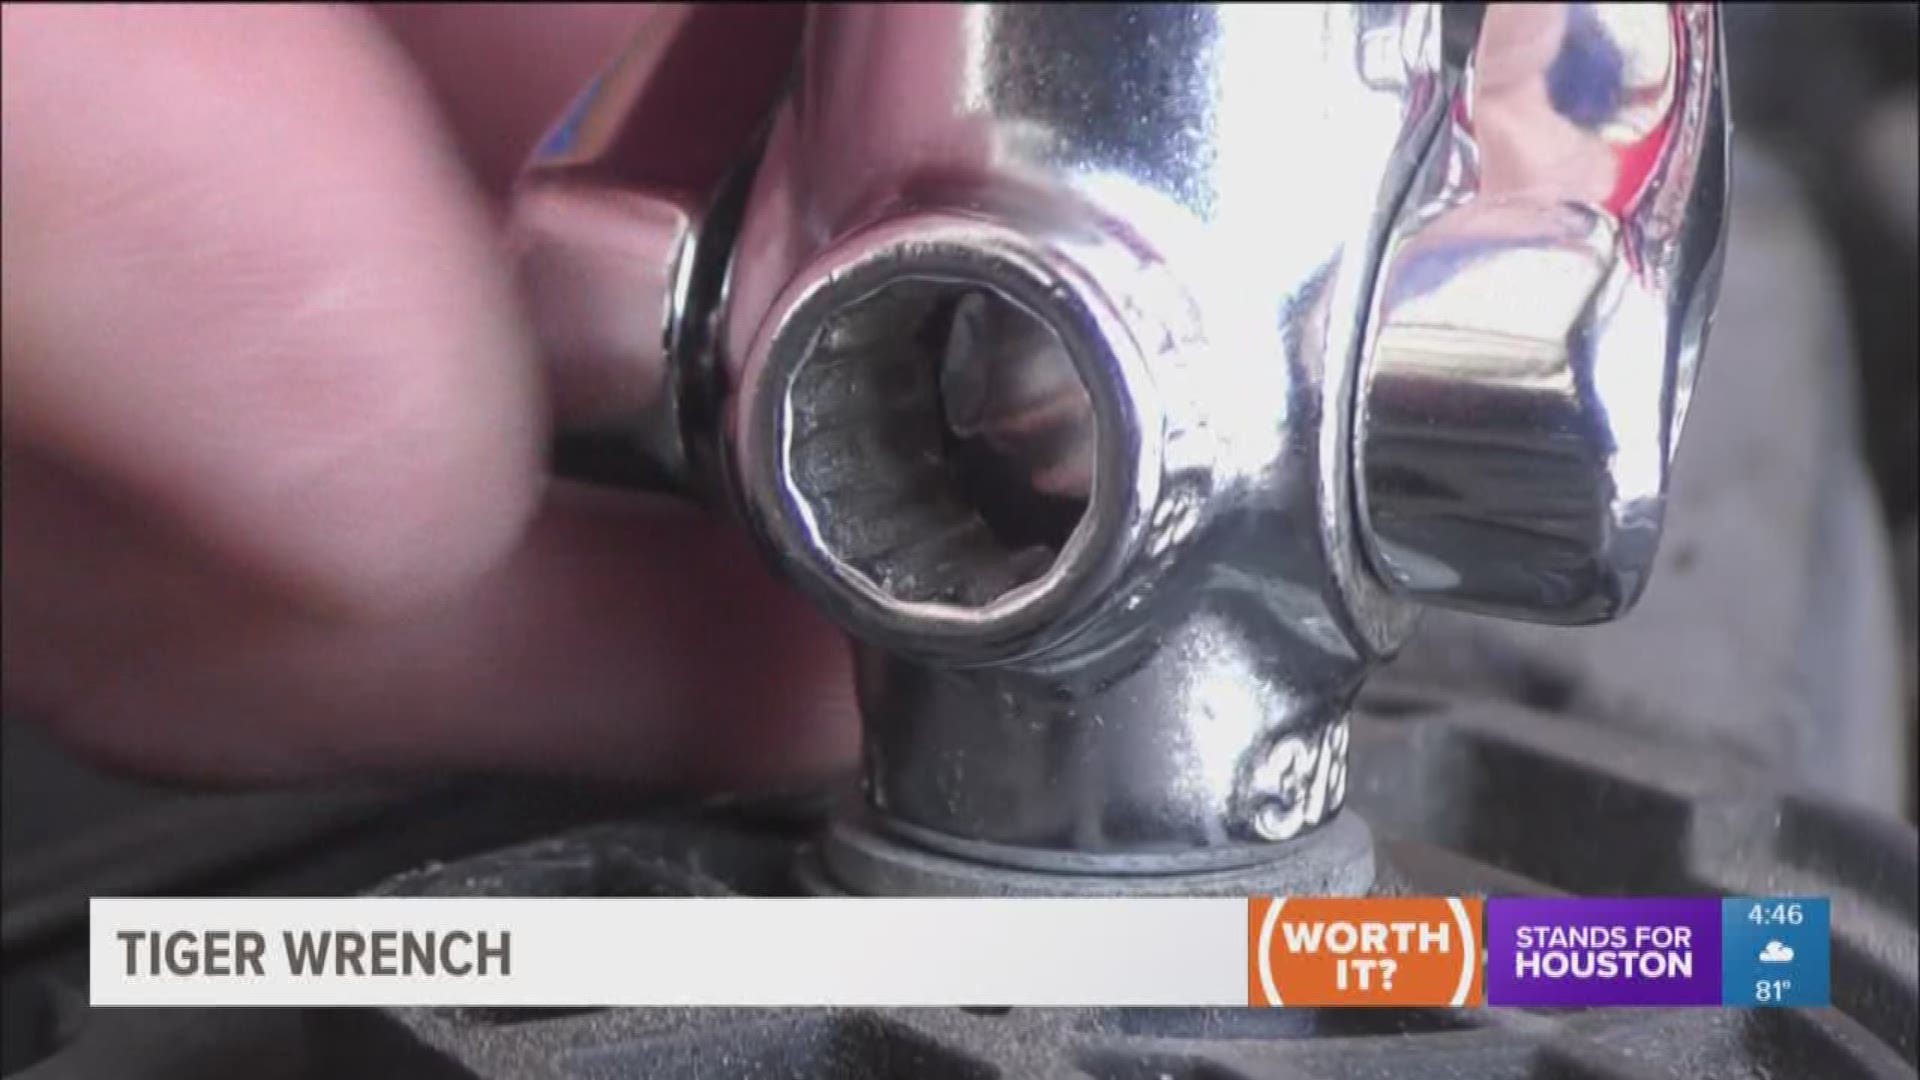 The Tiger Wrench is a multi-socket wrench that says it can replace an entire socket set. Tiffany Craig tried it out to determine if it's worth it.